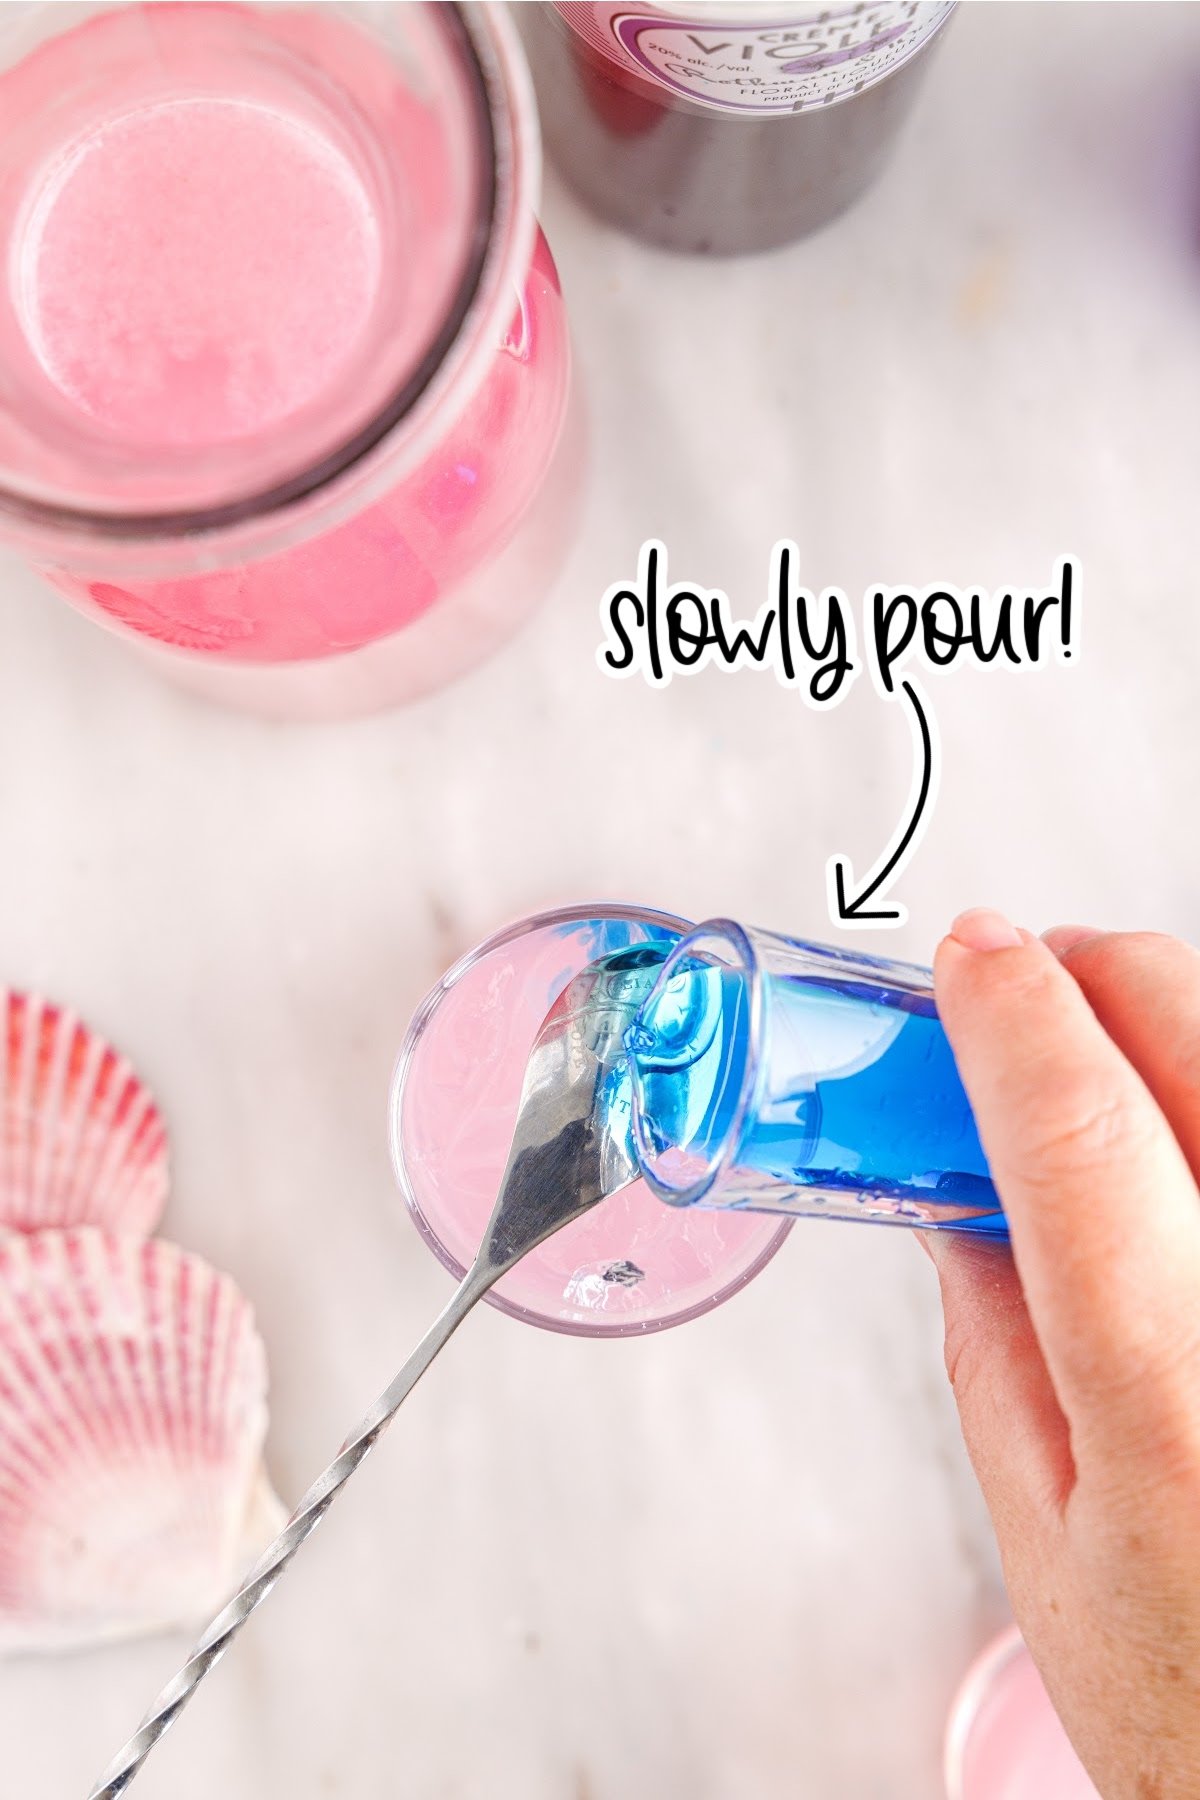 Pouring the blue liquor onto the back of a spoon into the pink lemonade.